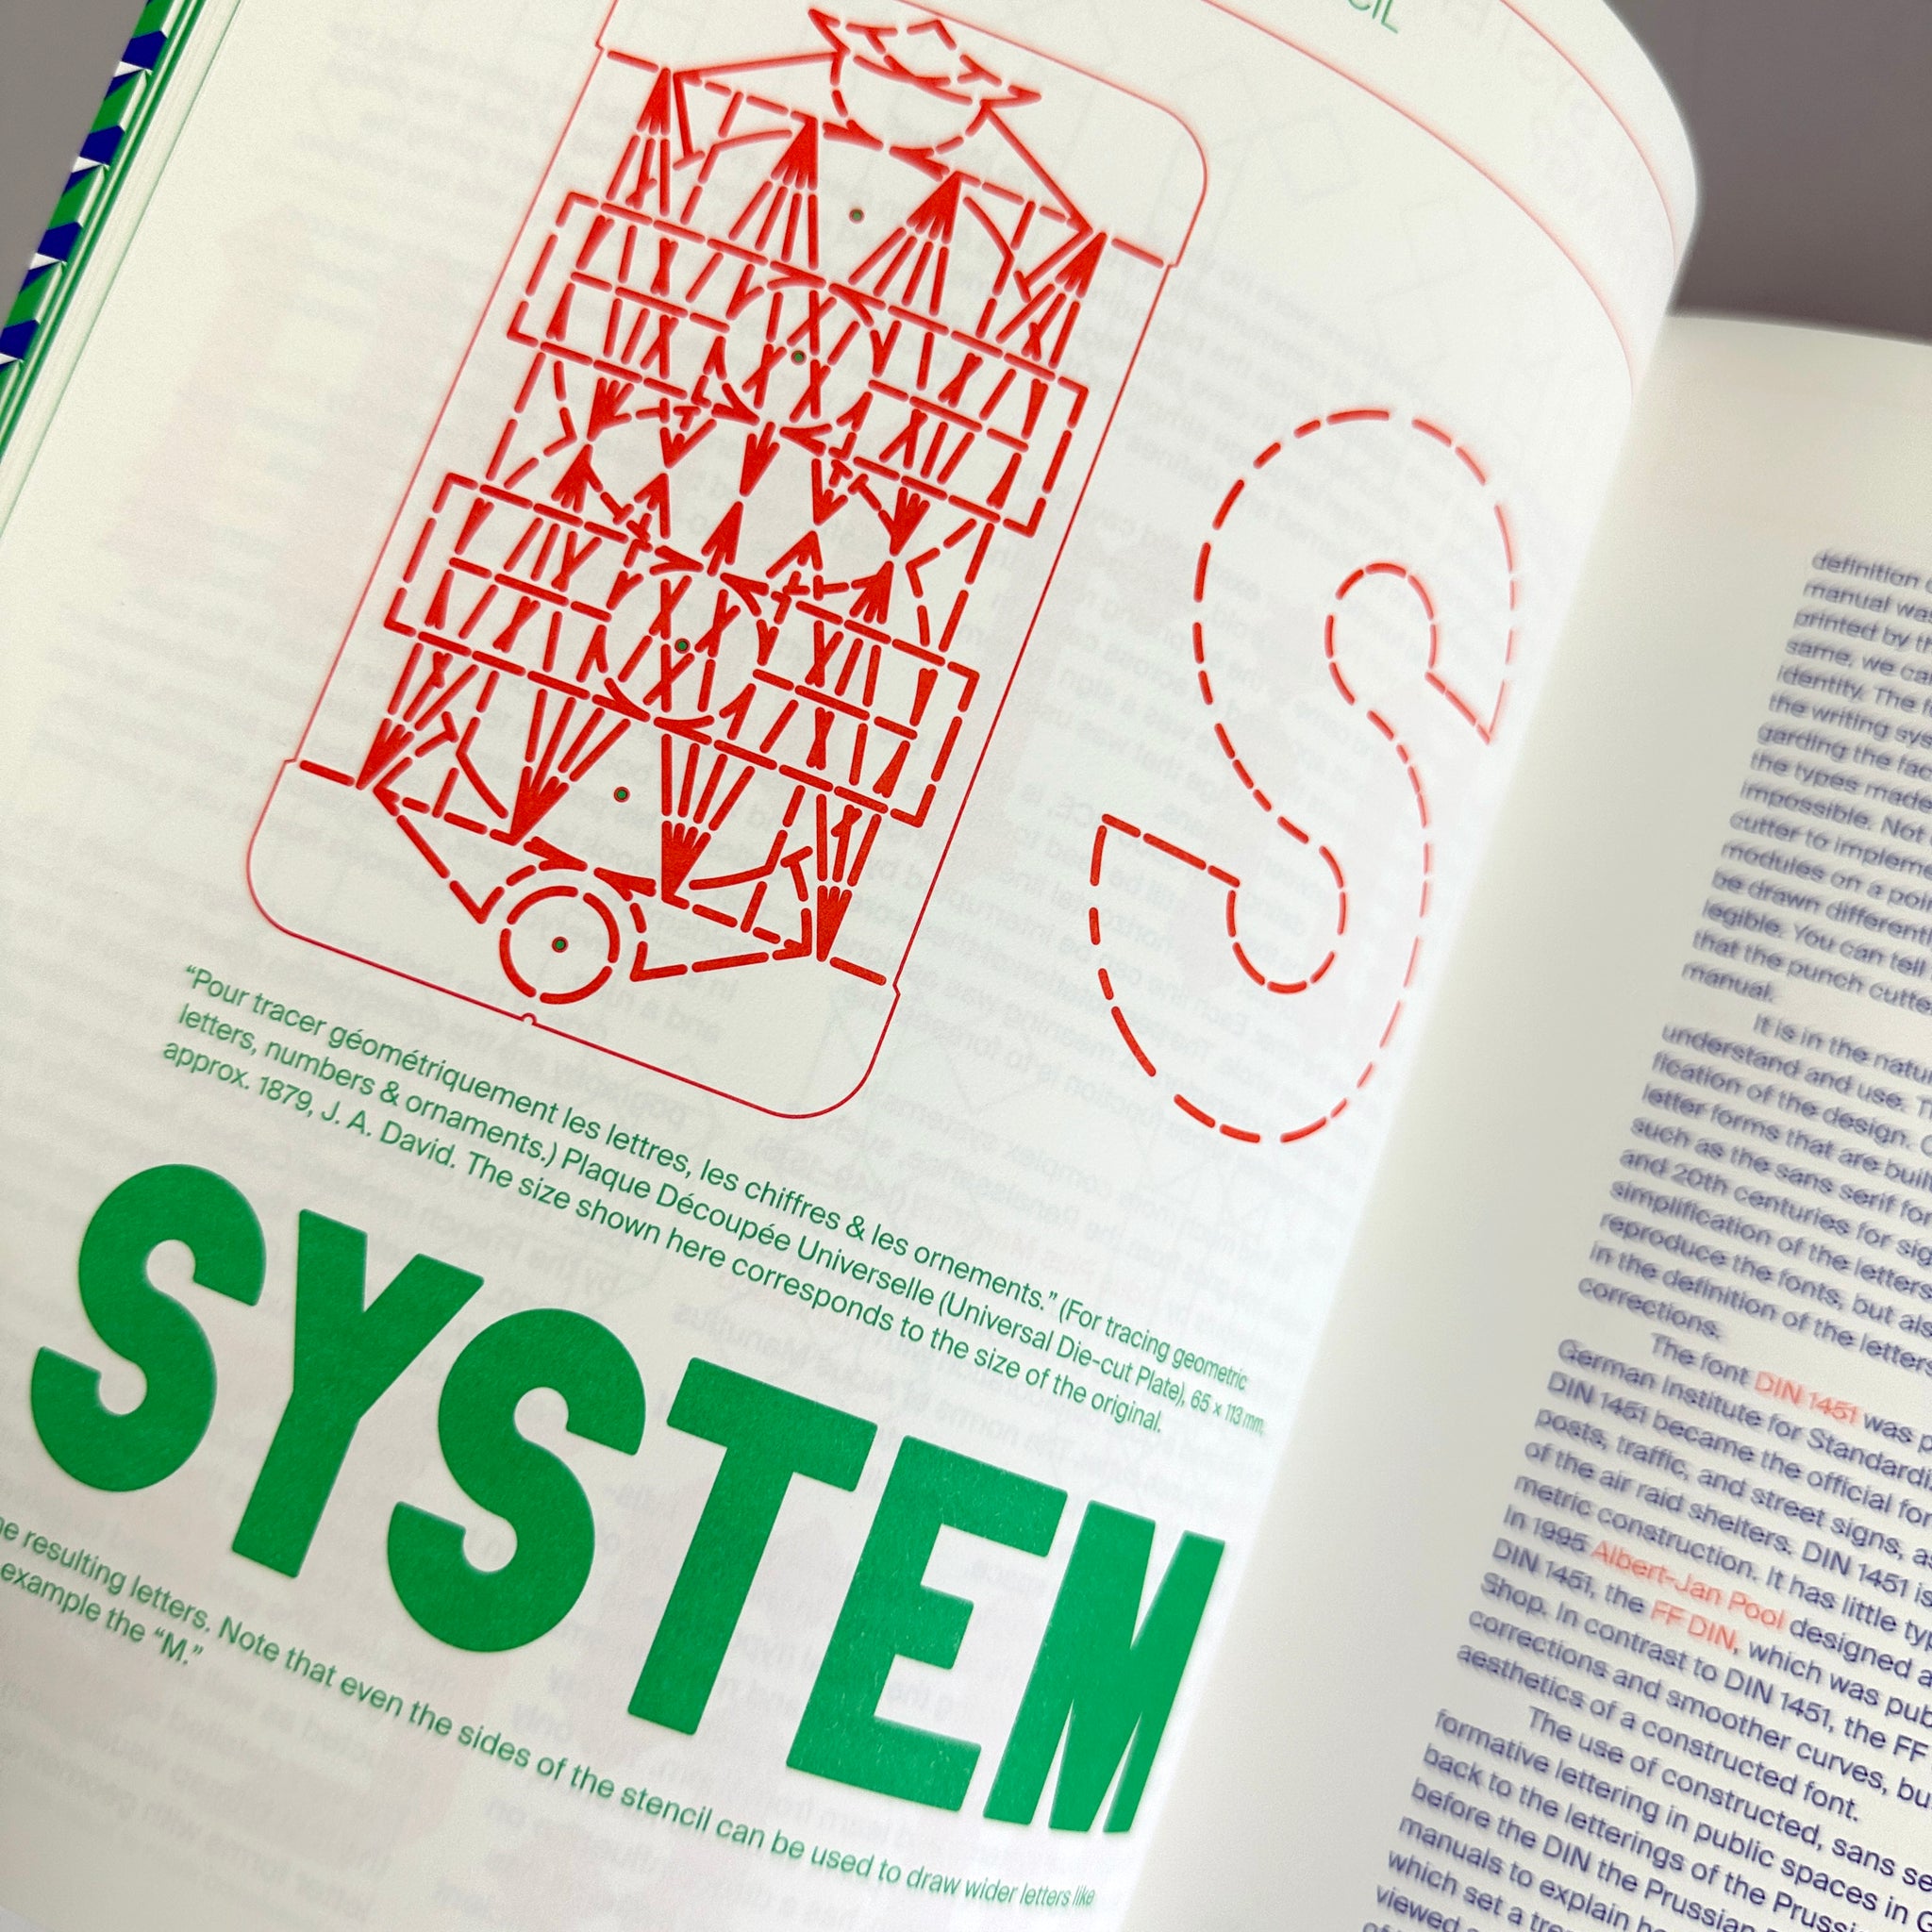 Flexible Visual Systems